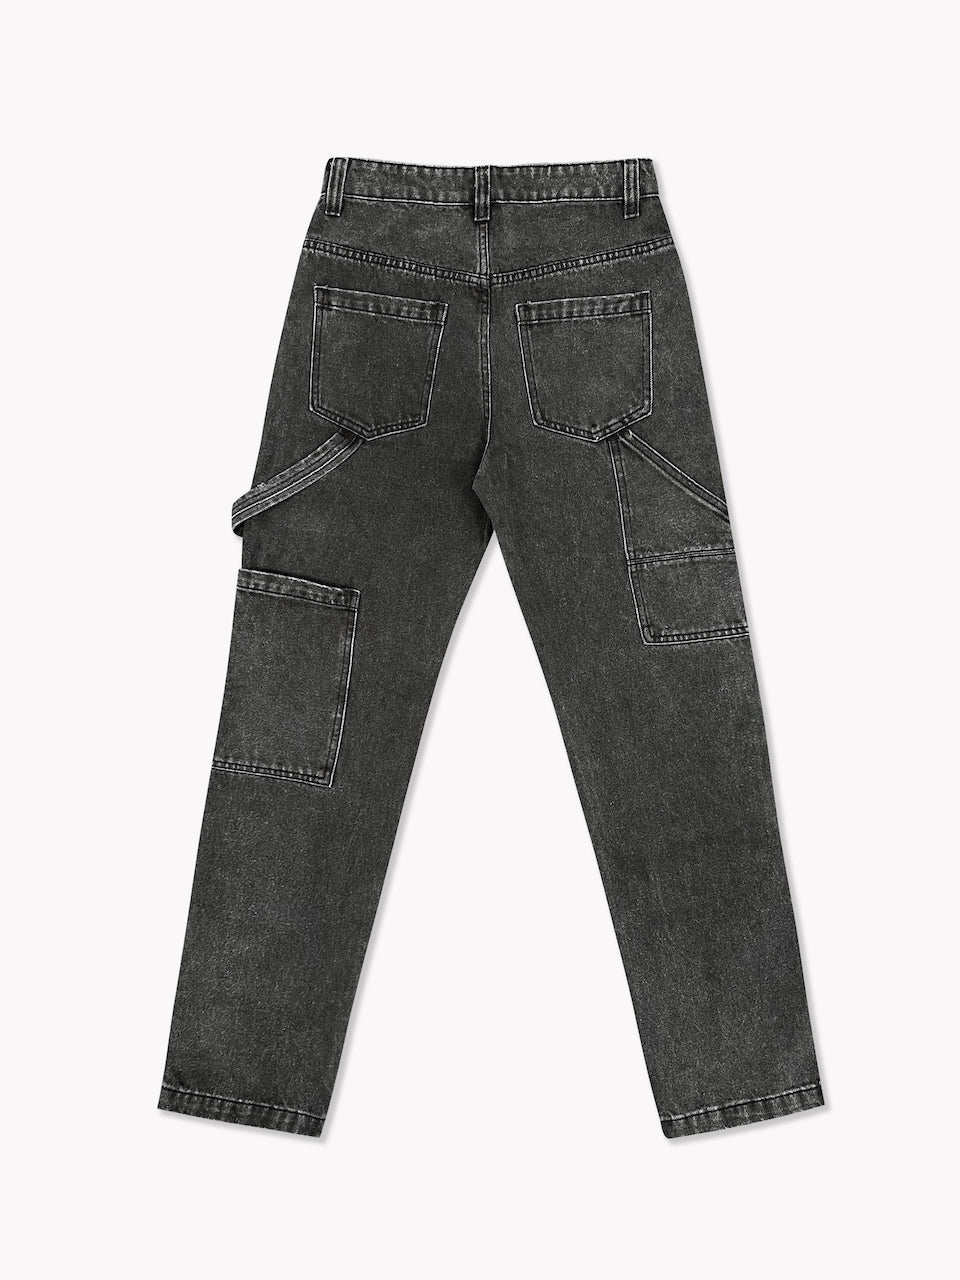 The Best Carpenter Jeans To Invest In This Spring